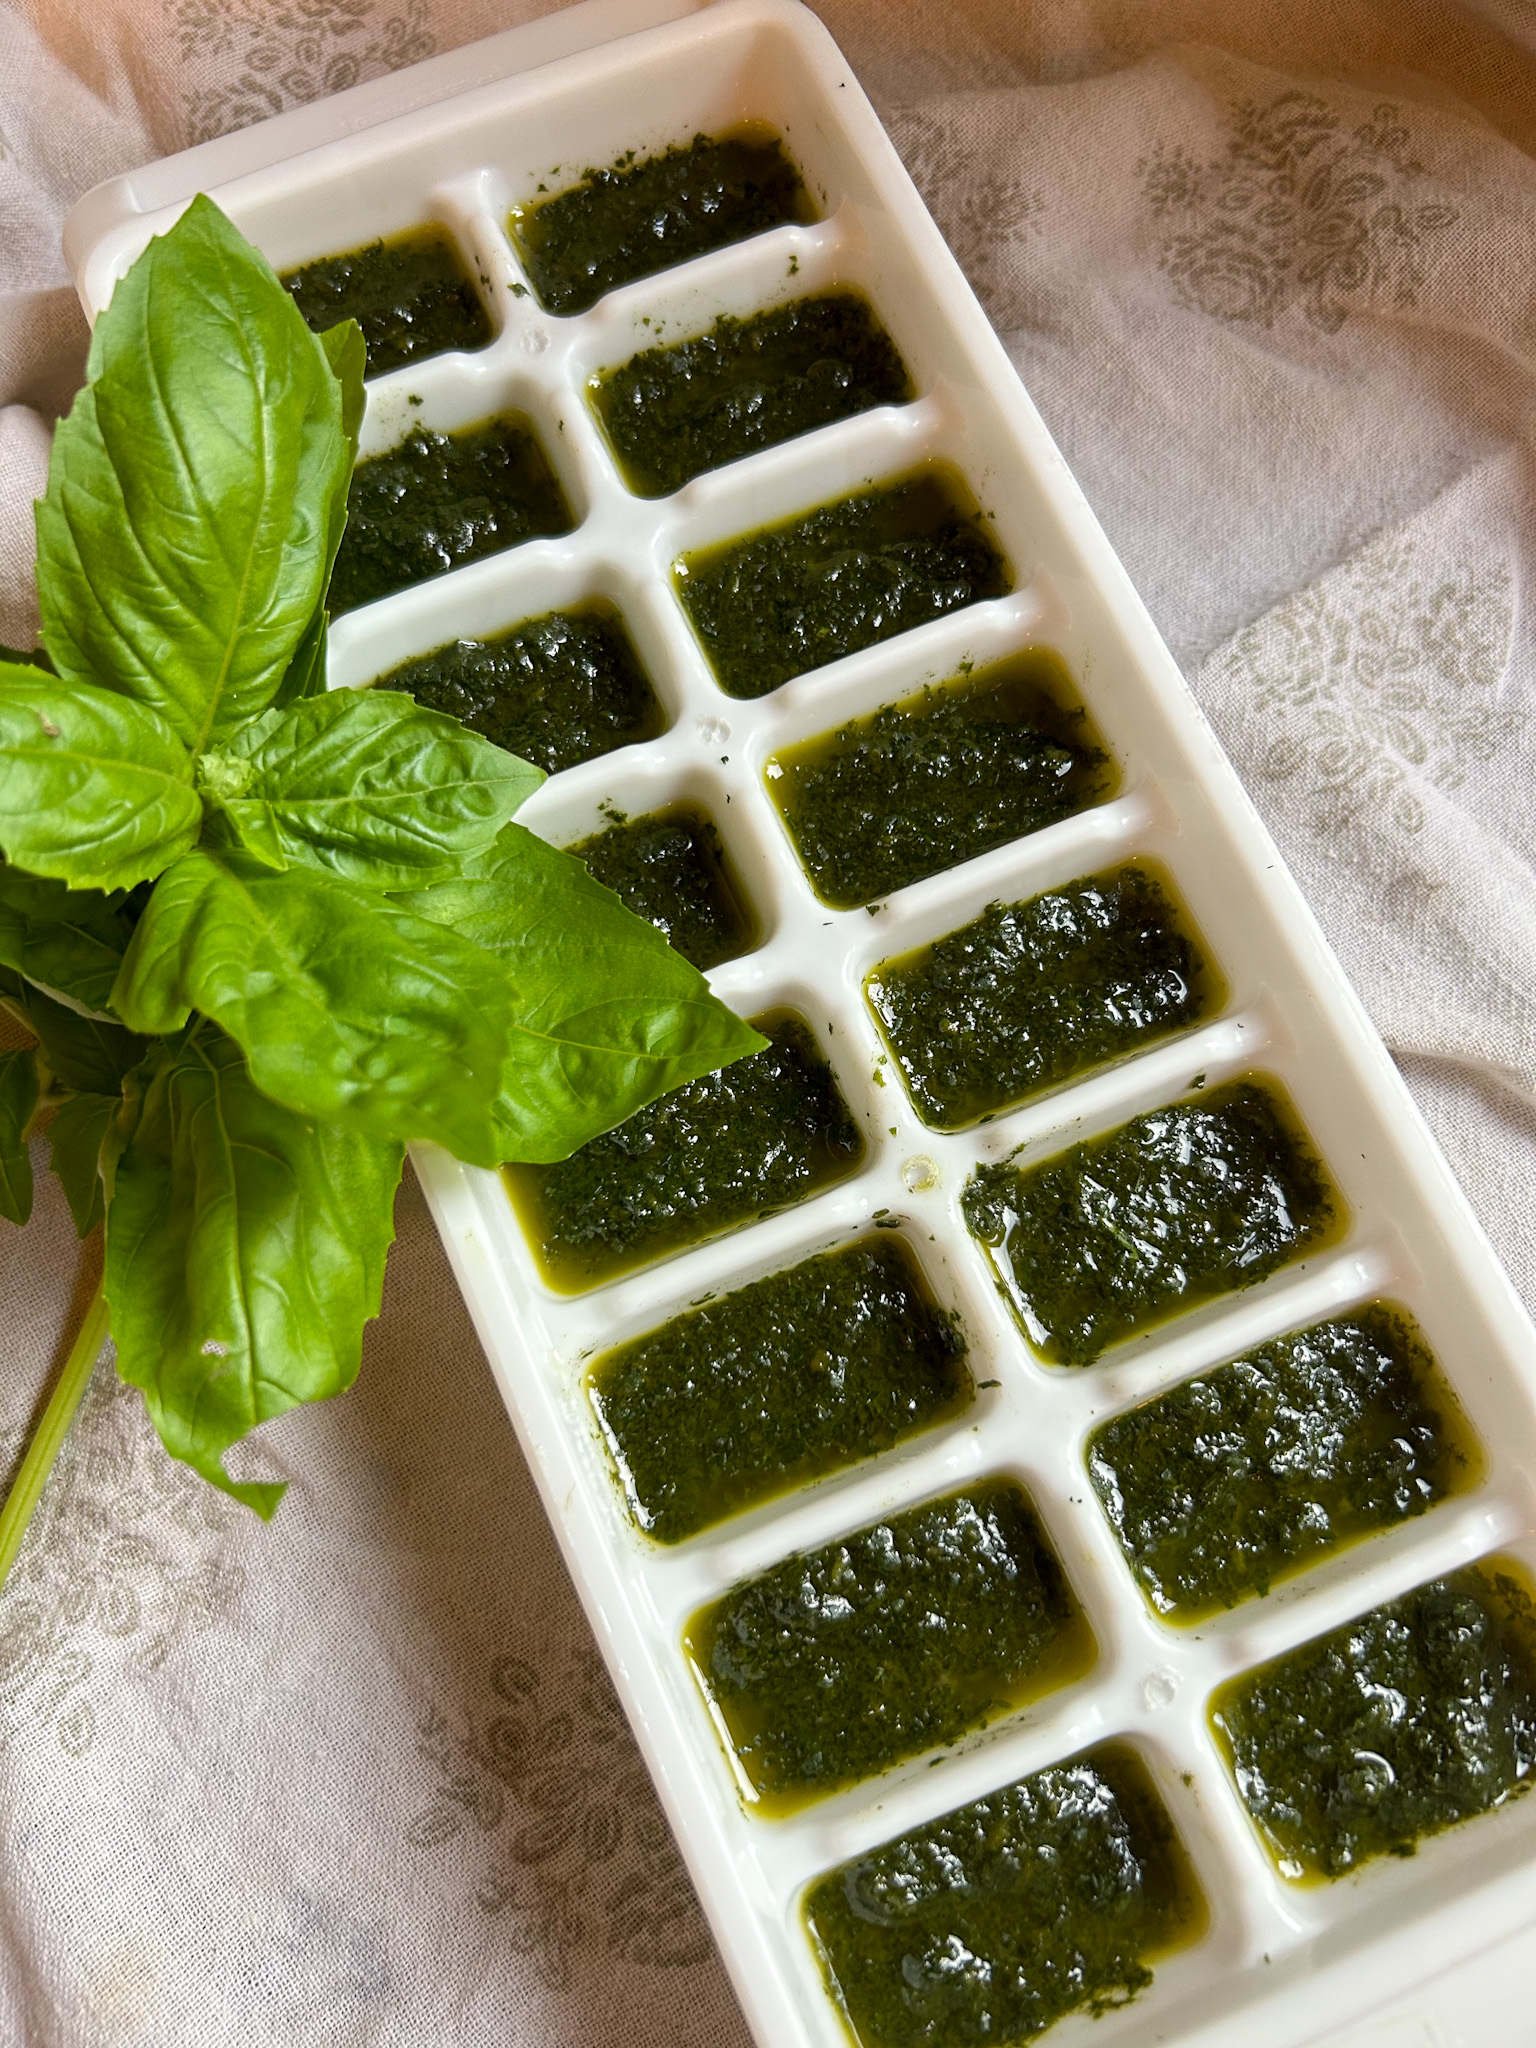 Chopped basil with olive oil in ice cube trays. Next to sprig of basil.